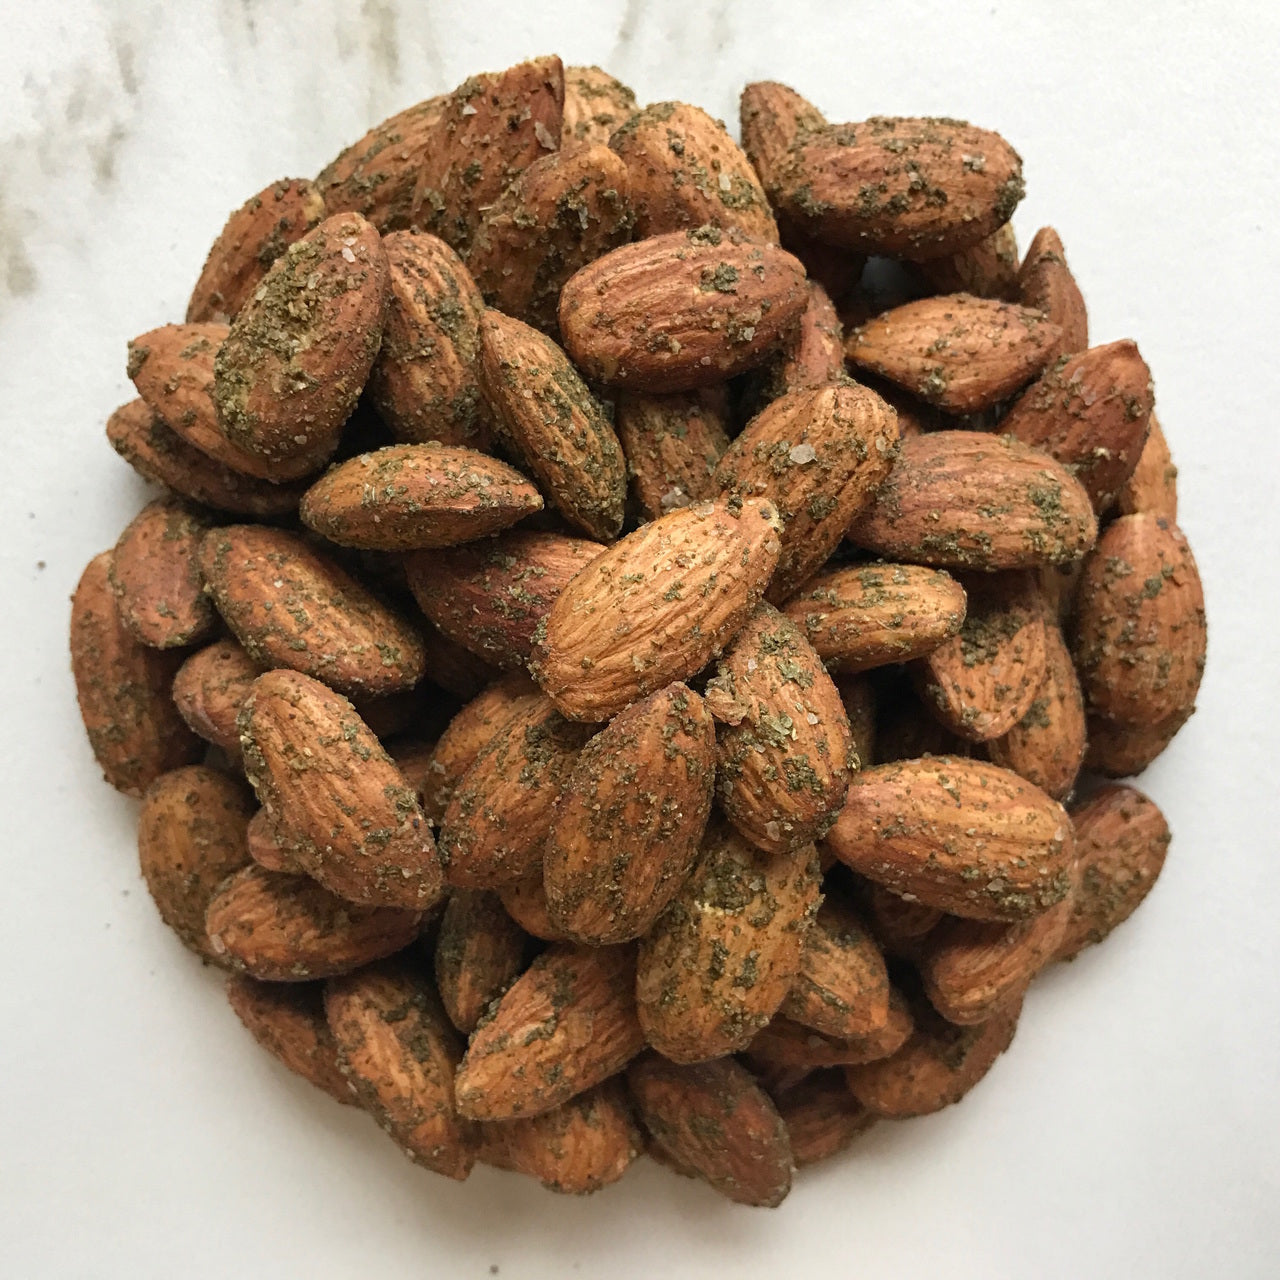 Ranch Smoked Almonds